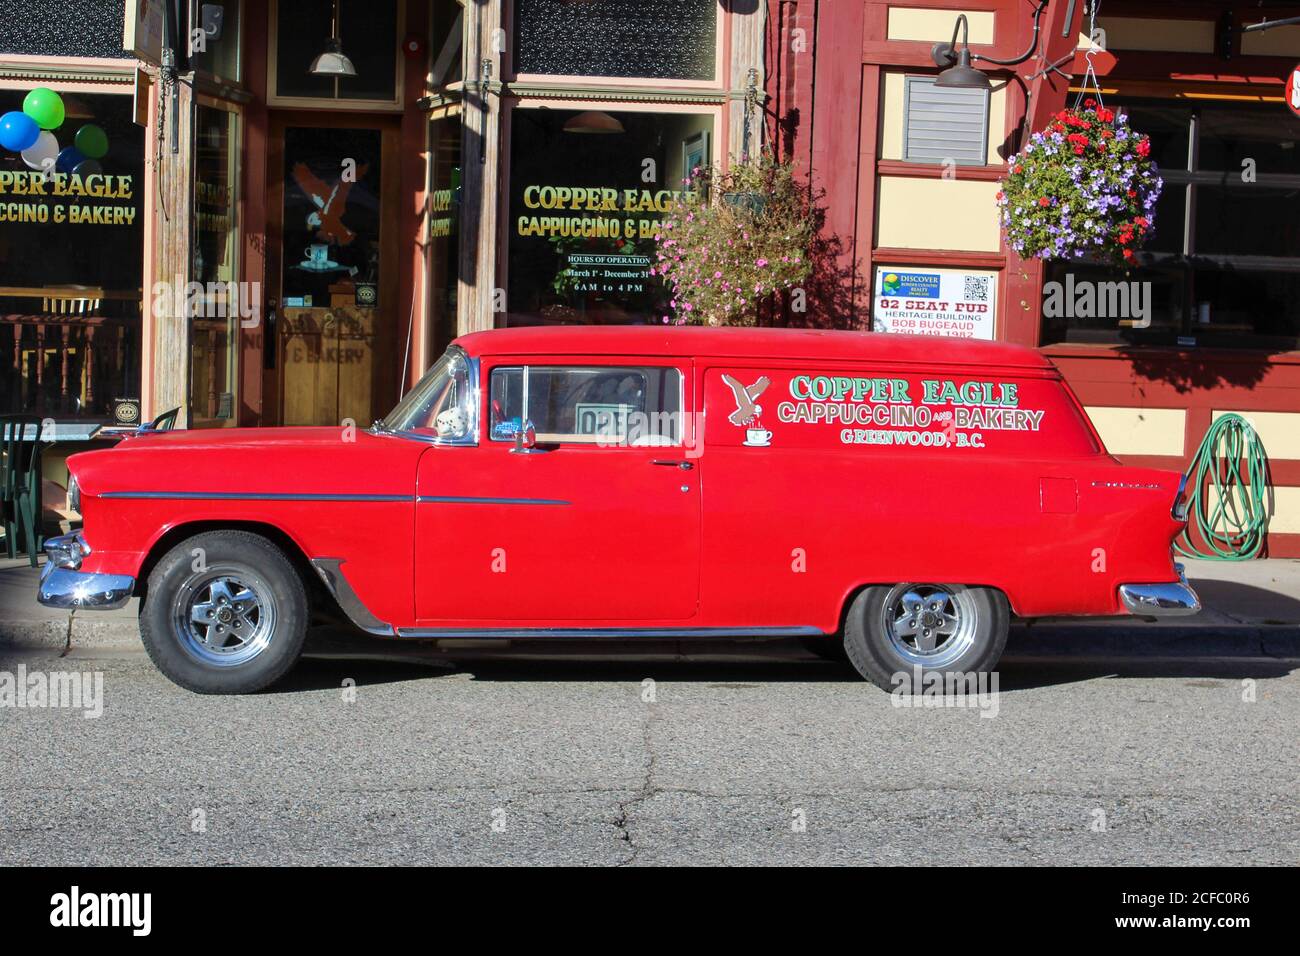 Delivery van / station wagon of the Copper Eagle Bakery in Greenwood BC, Canada Stock Photo